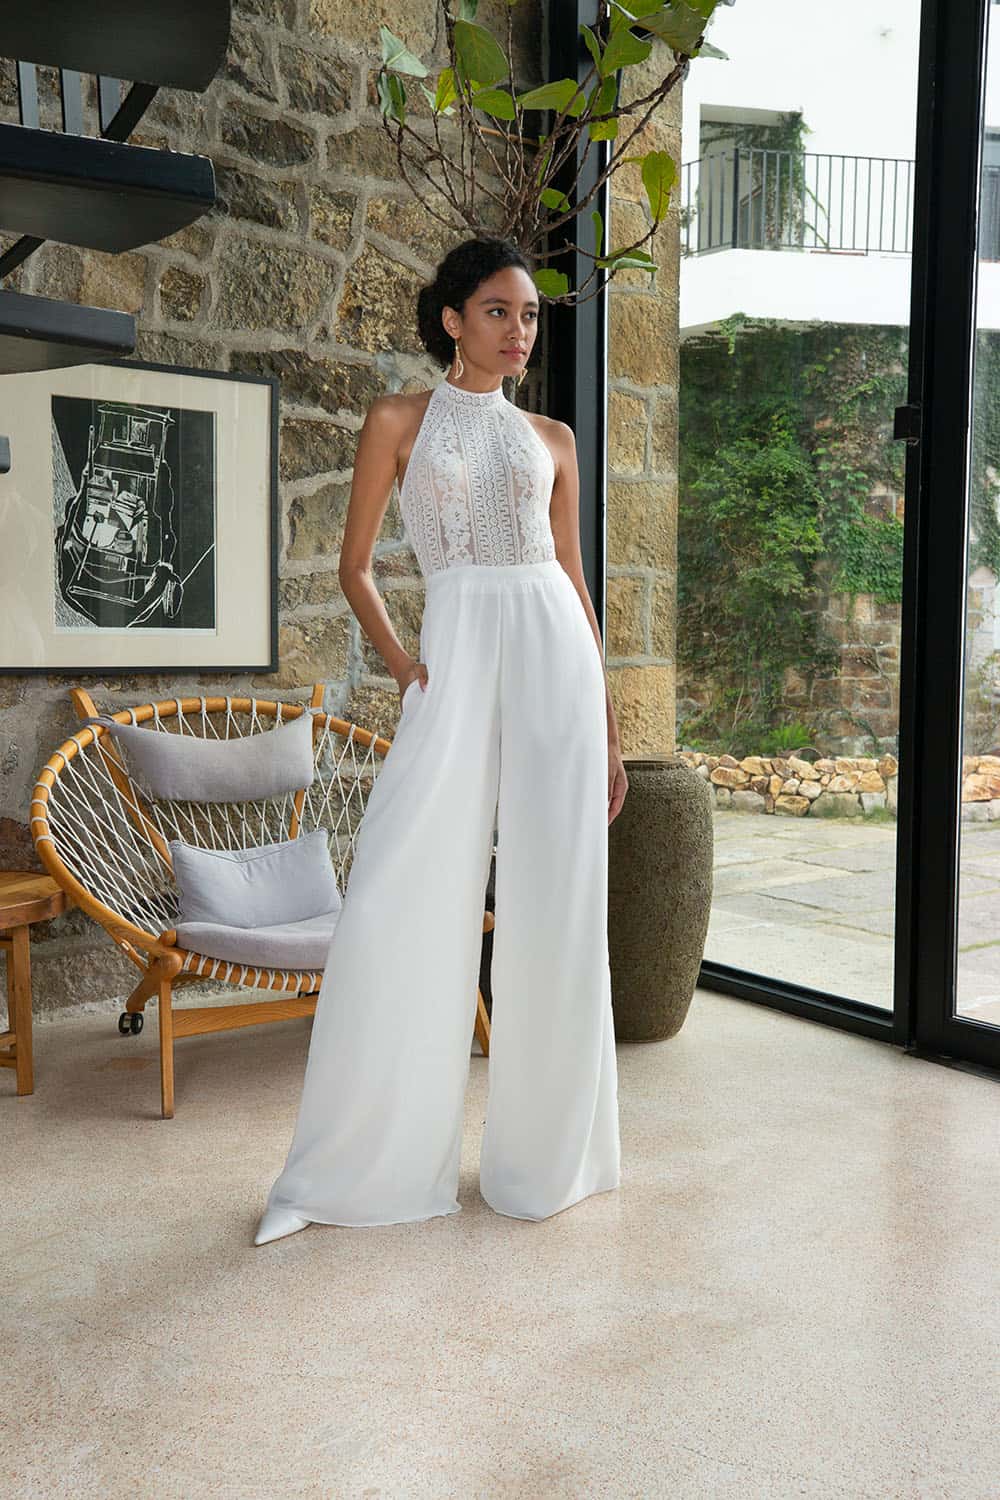 Bride Wore Semi-Sheer Dress With Plunging, Illusion Neckline